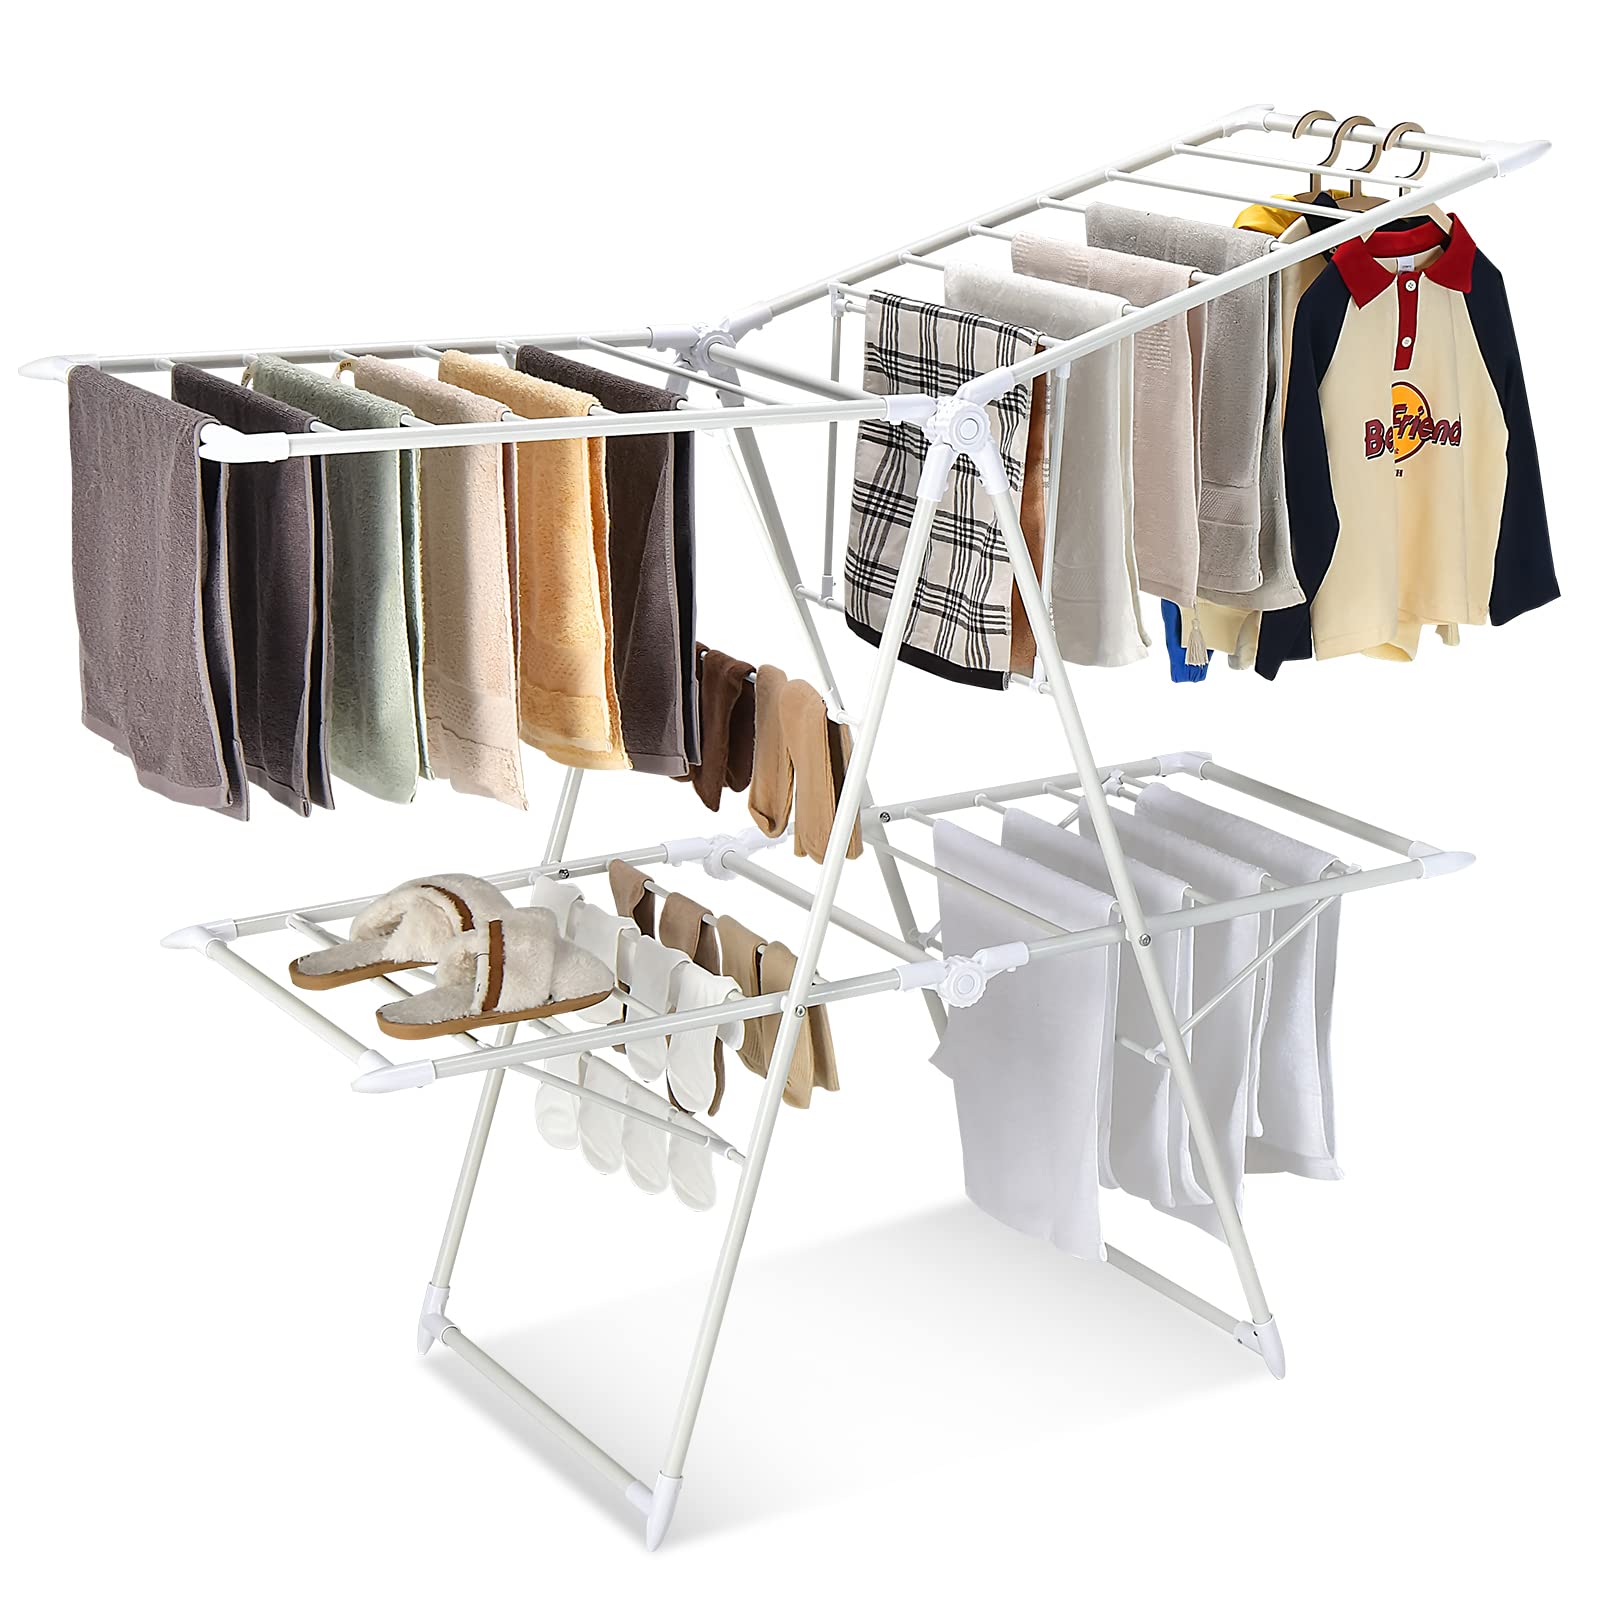 Giantex Clothes Drying Rack, 2-Level Folding Laundry Drying Rack, with Height-Adjustable Wings, White